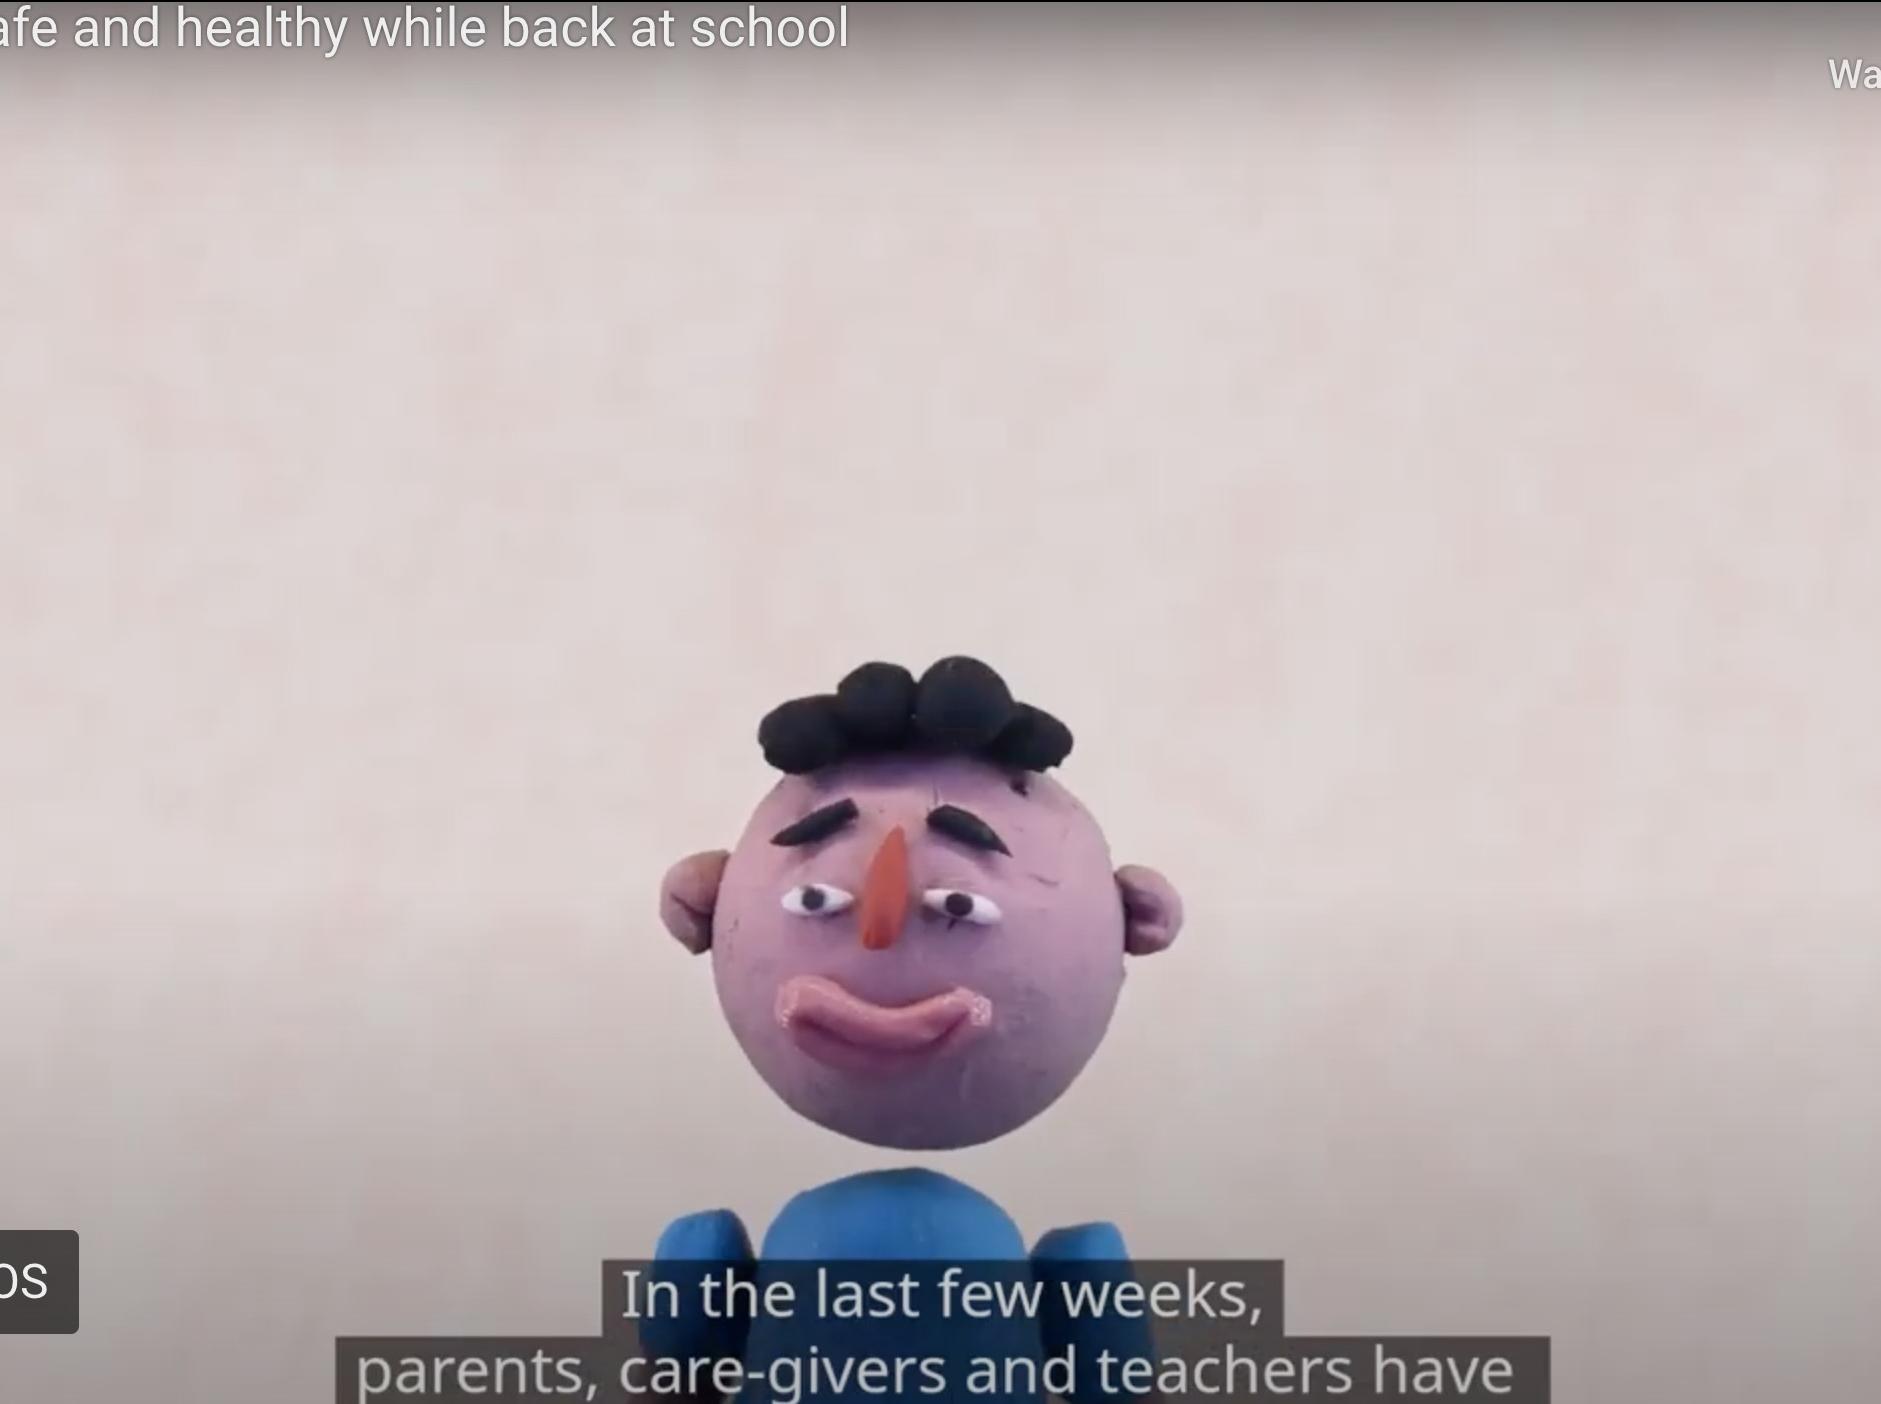 Video: Stay safe and healthy while back at school